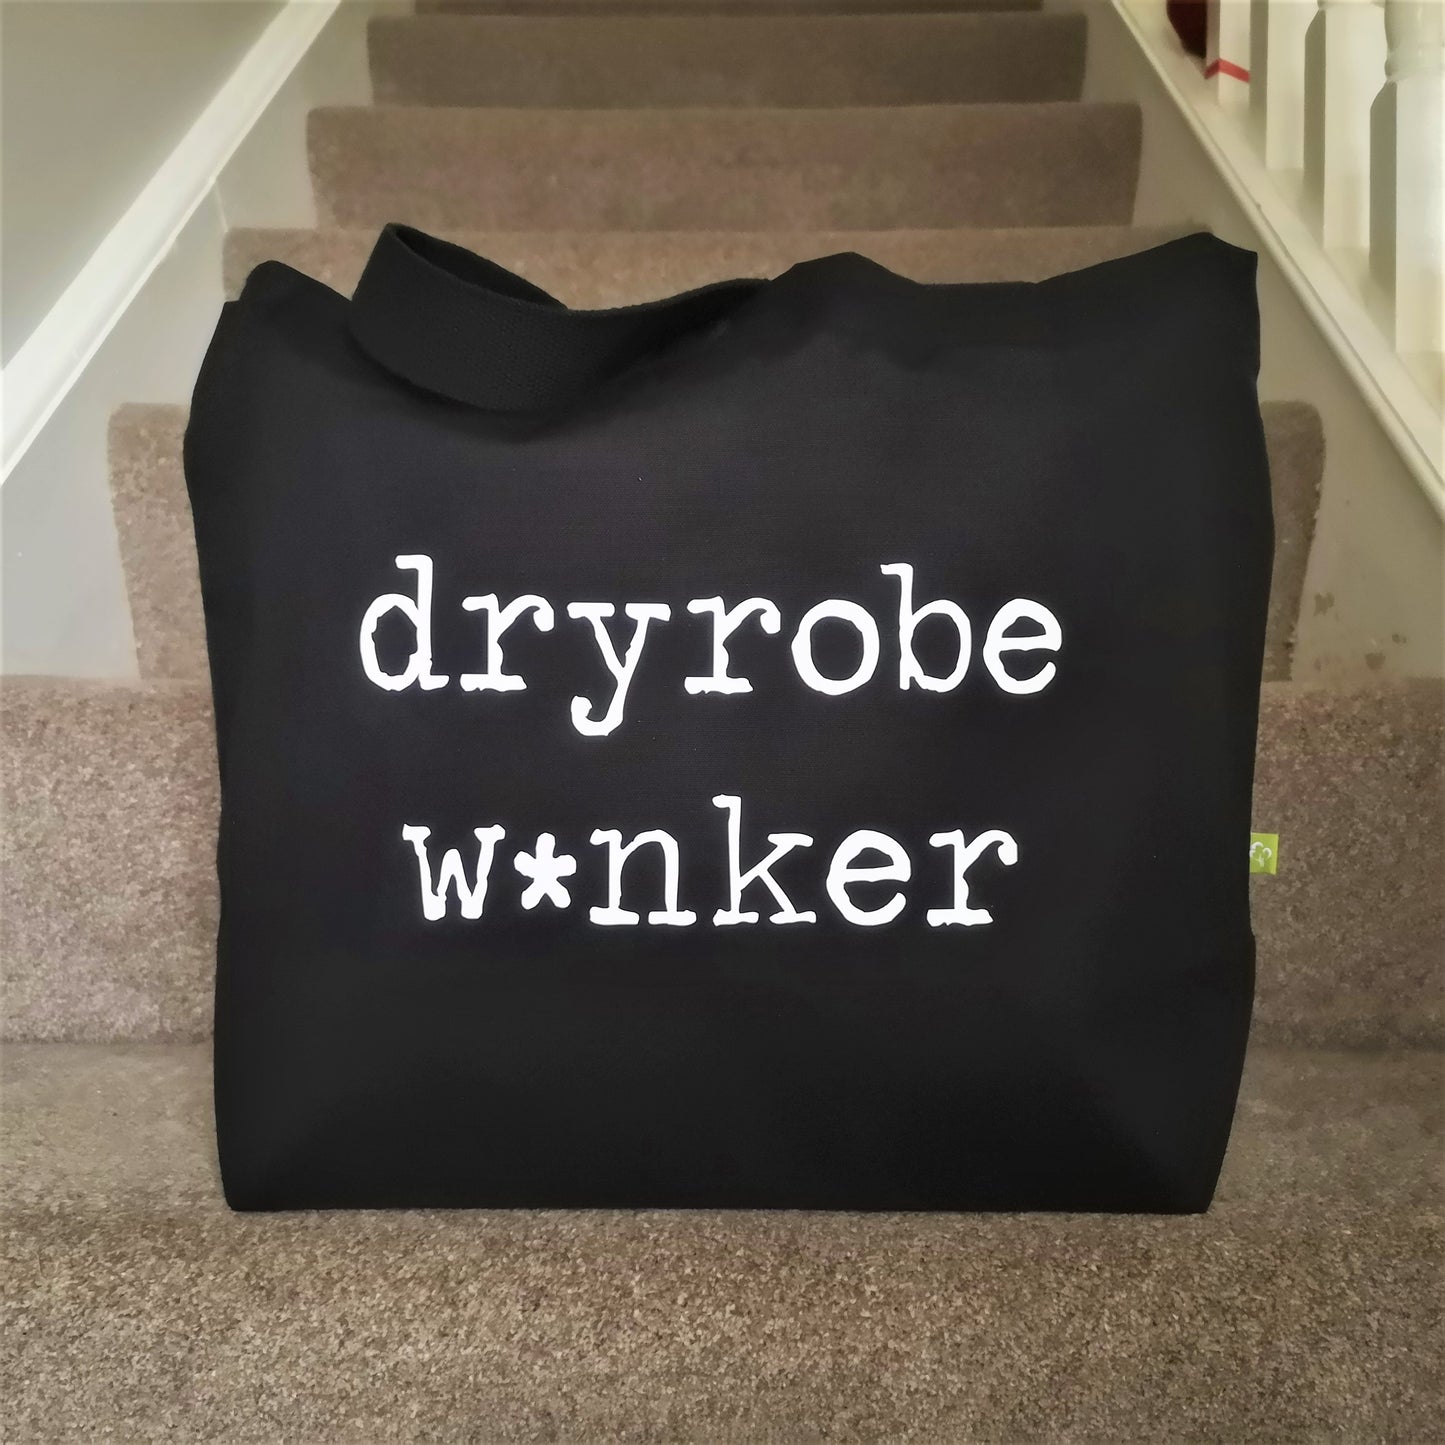 A black organic tote with the following written on it in white type font - DRYROBE W*NKER